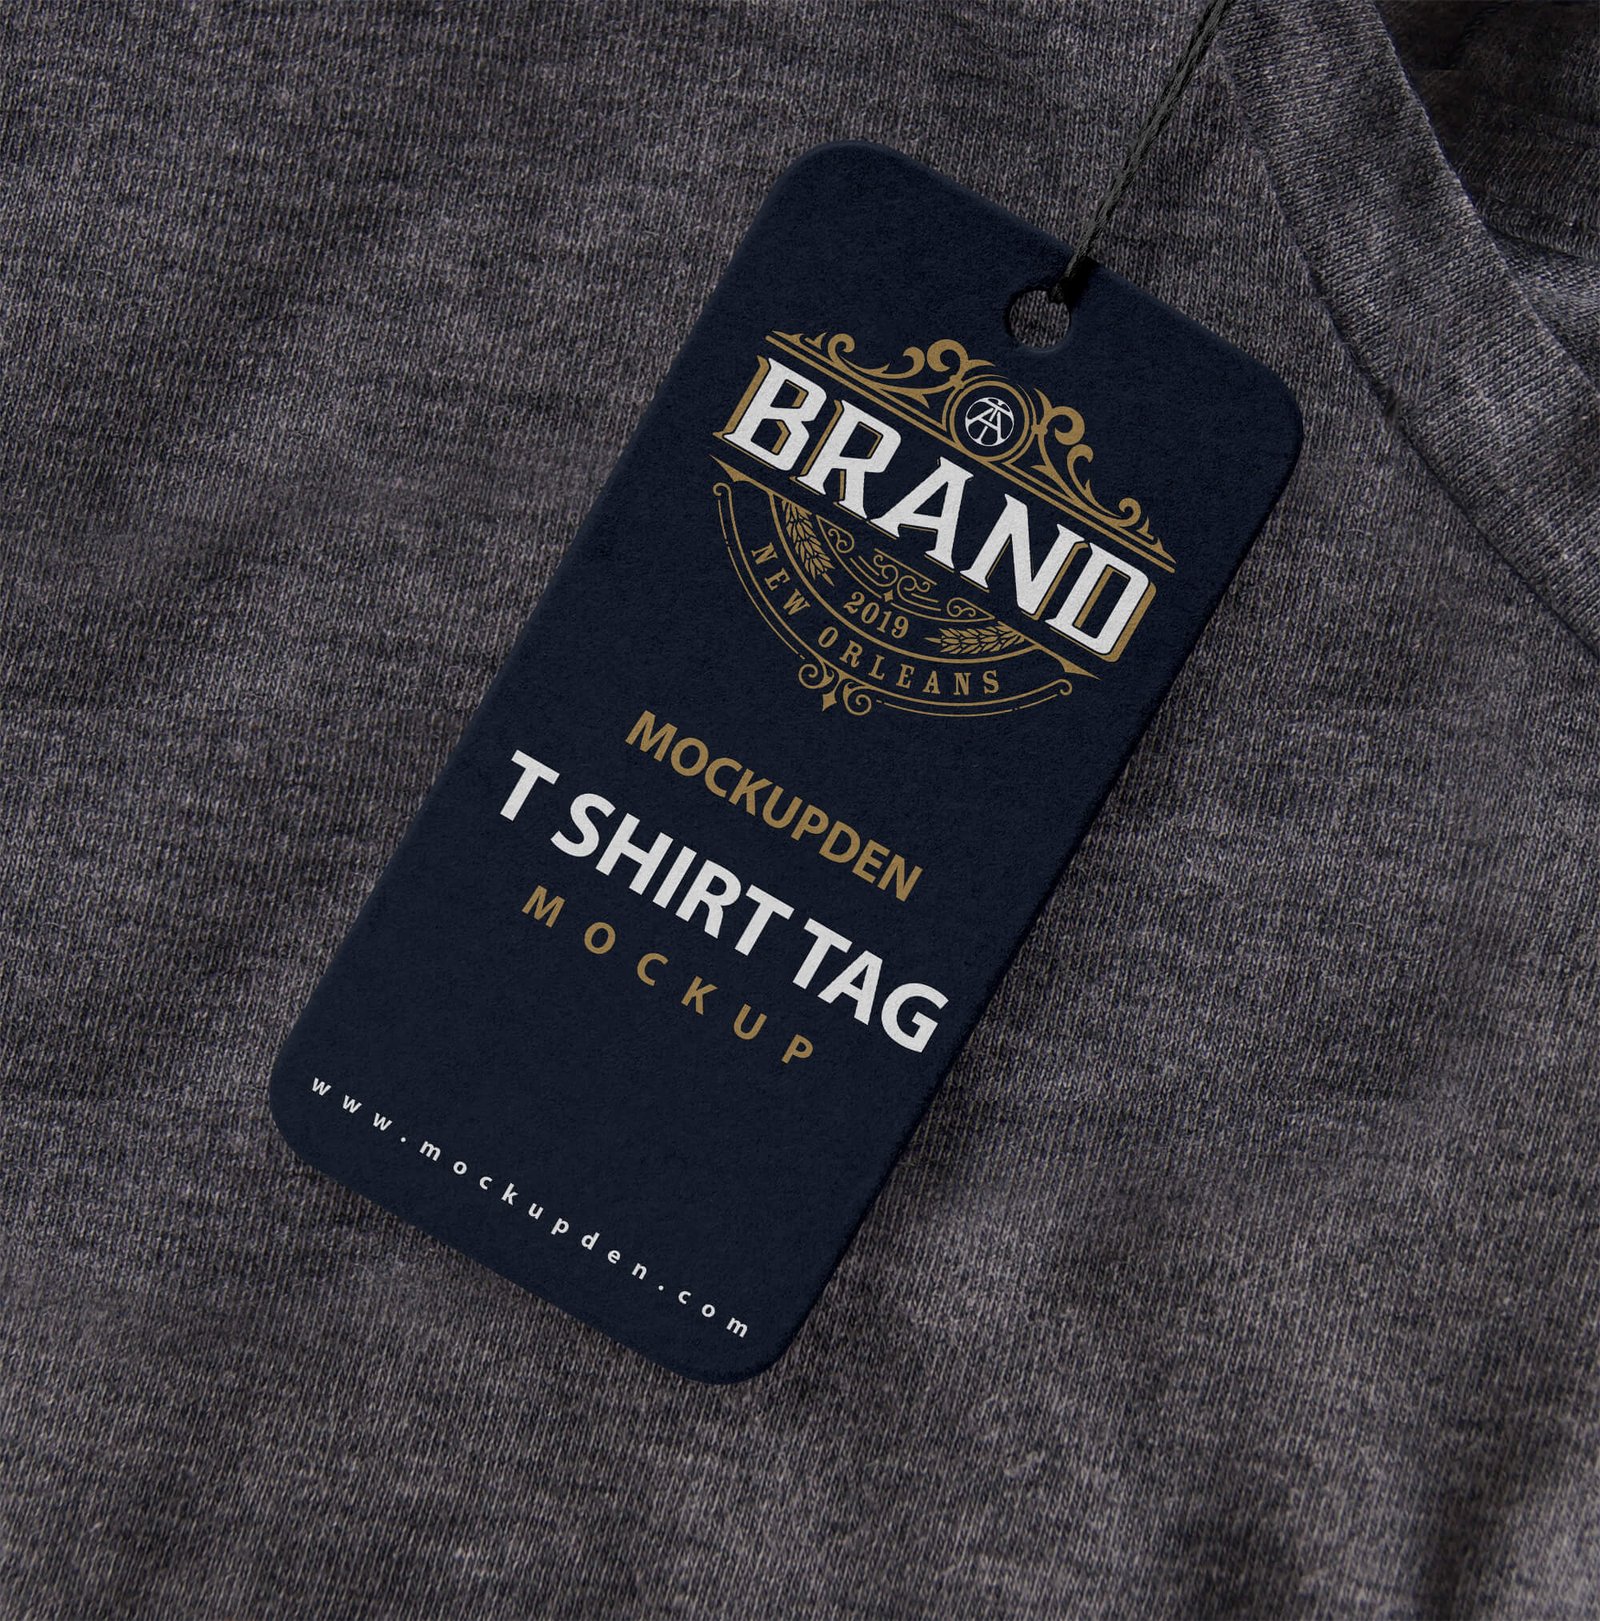 9 T Shirt Tag Template Perfect Template Ideas